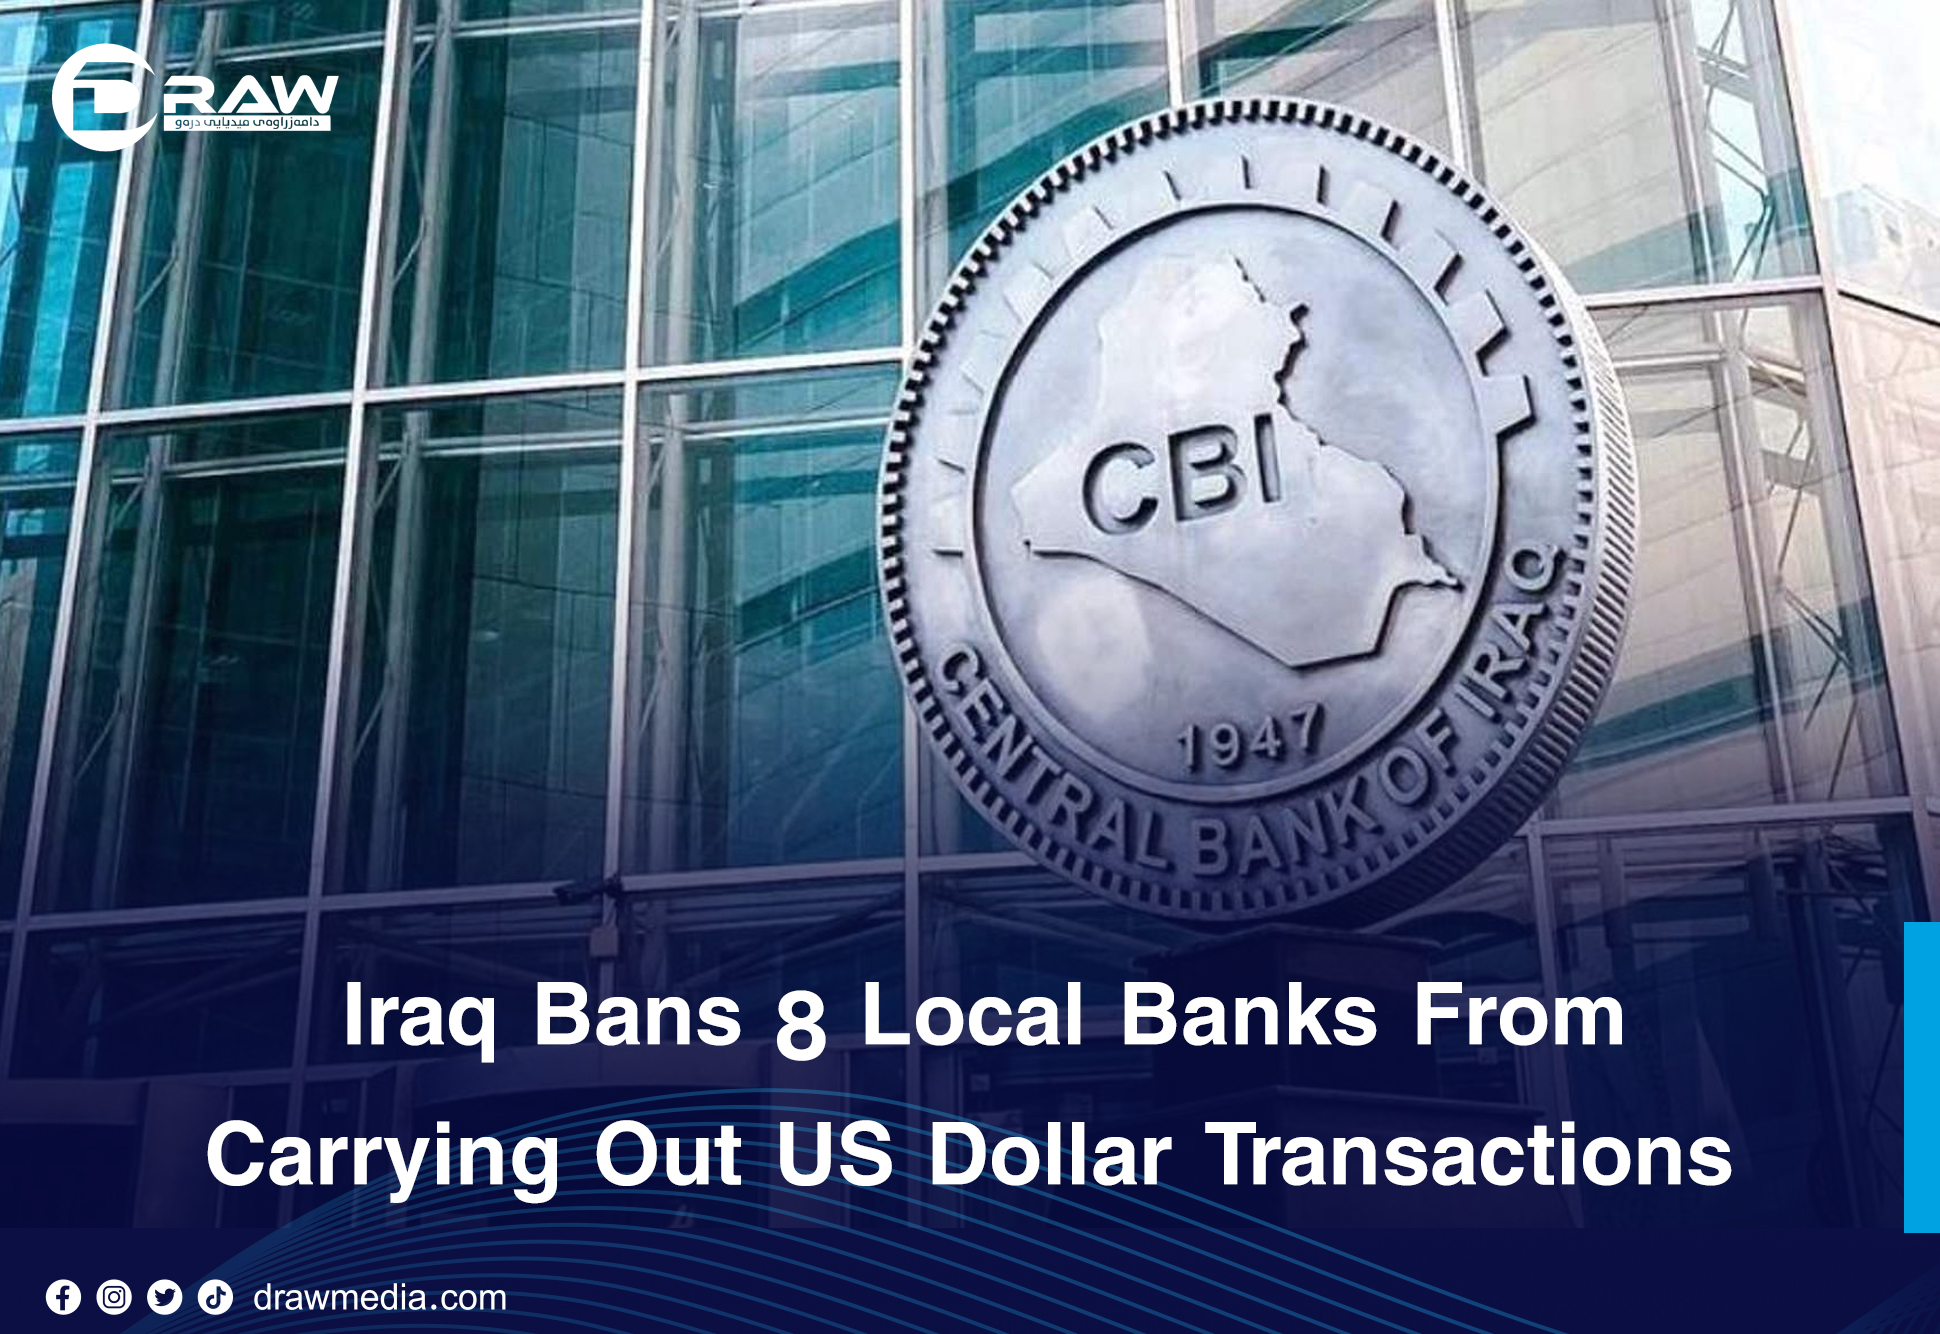 Draw Media- Iraq Bans 8 Local Banks From Carrying Out US Dollar Transactions